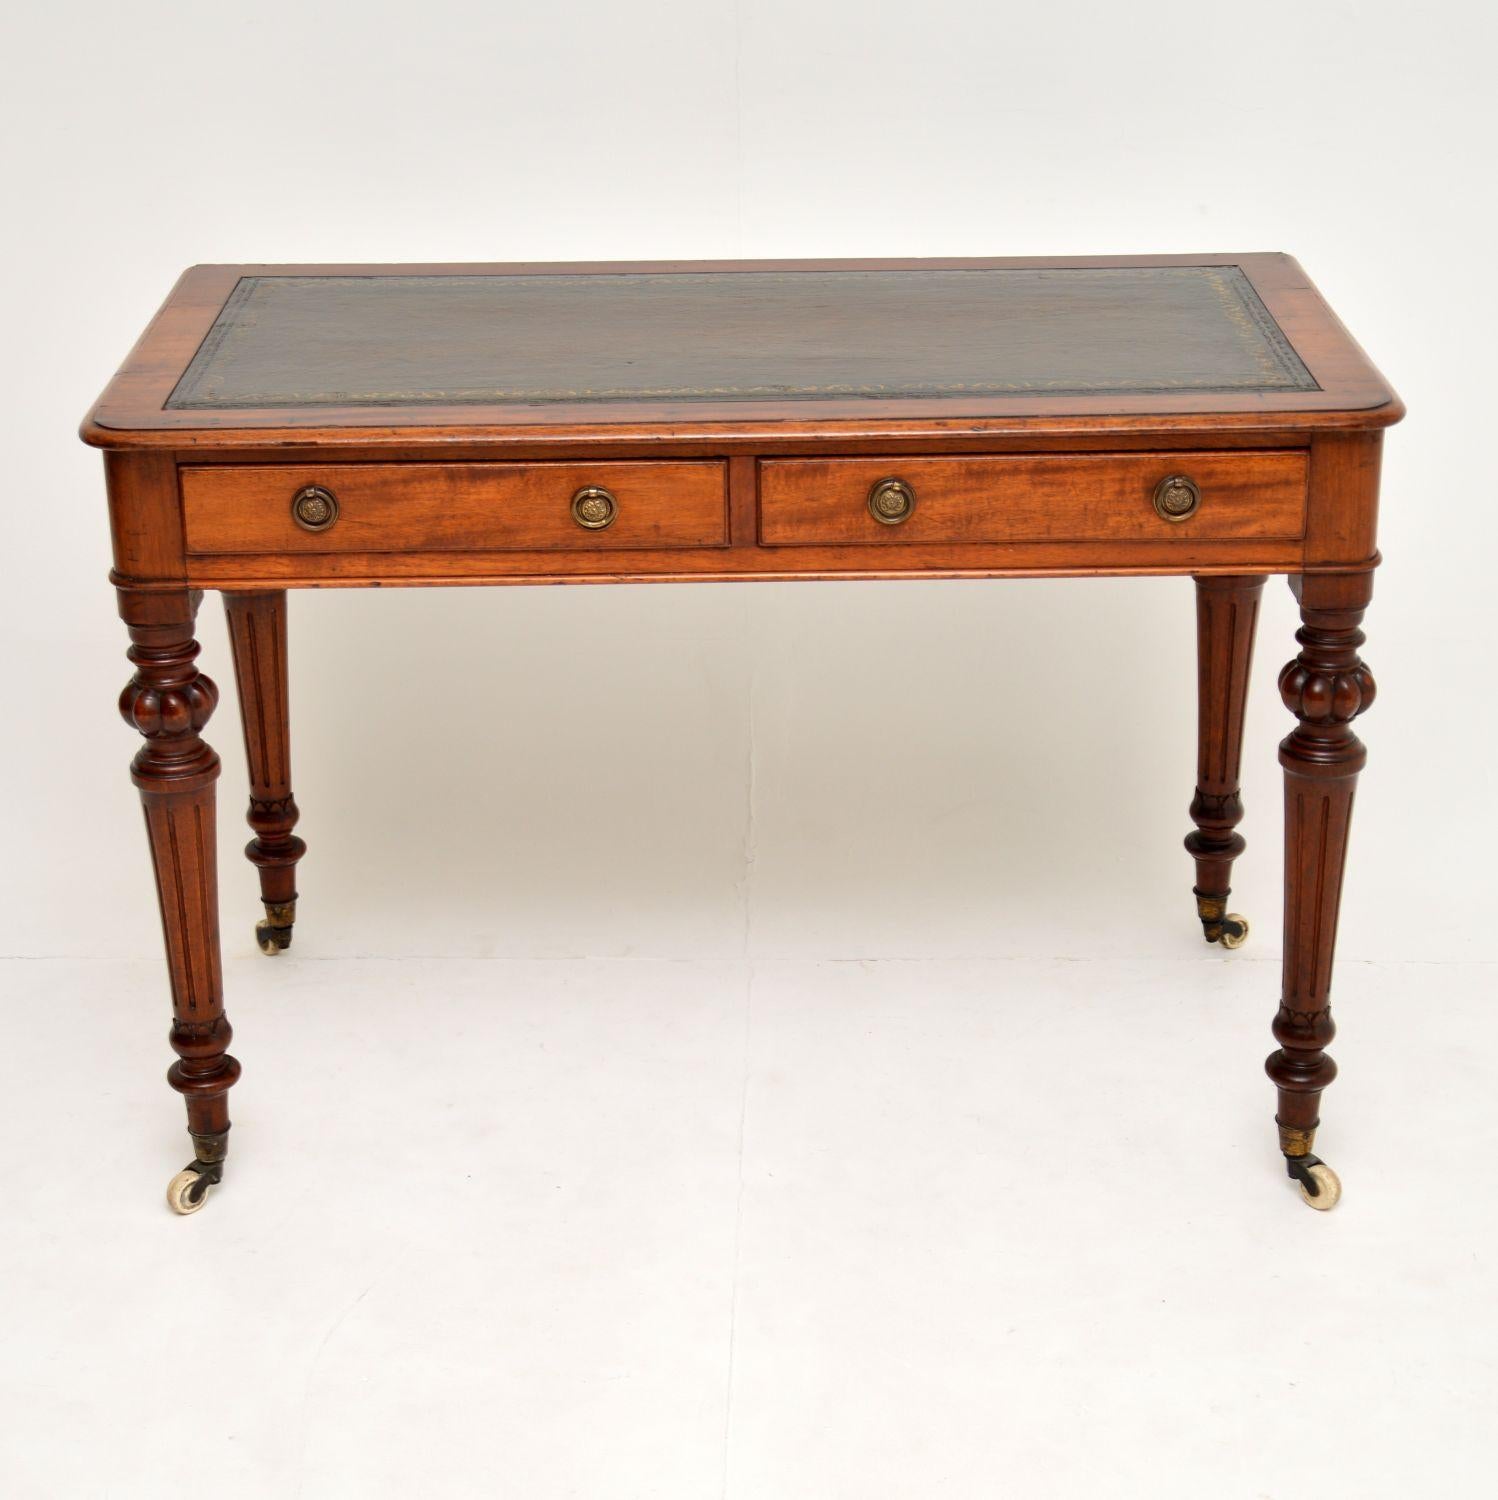 A smart and fine quality antique William IV mahogany writing table, dating from circa 1830-1840 period.

This is beautifully made, with fantastic turned fluted legs, with carved bulbous features above and sitting on original porcelain casters. The